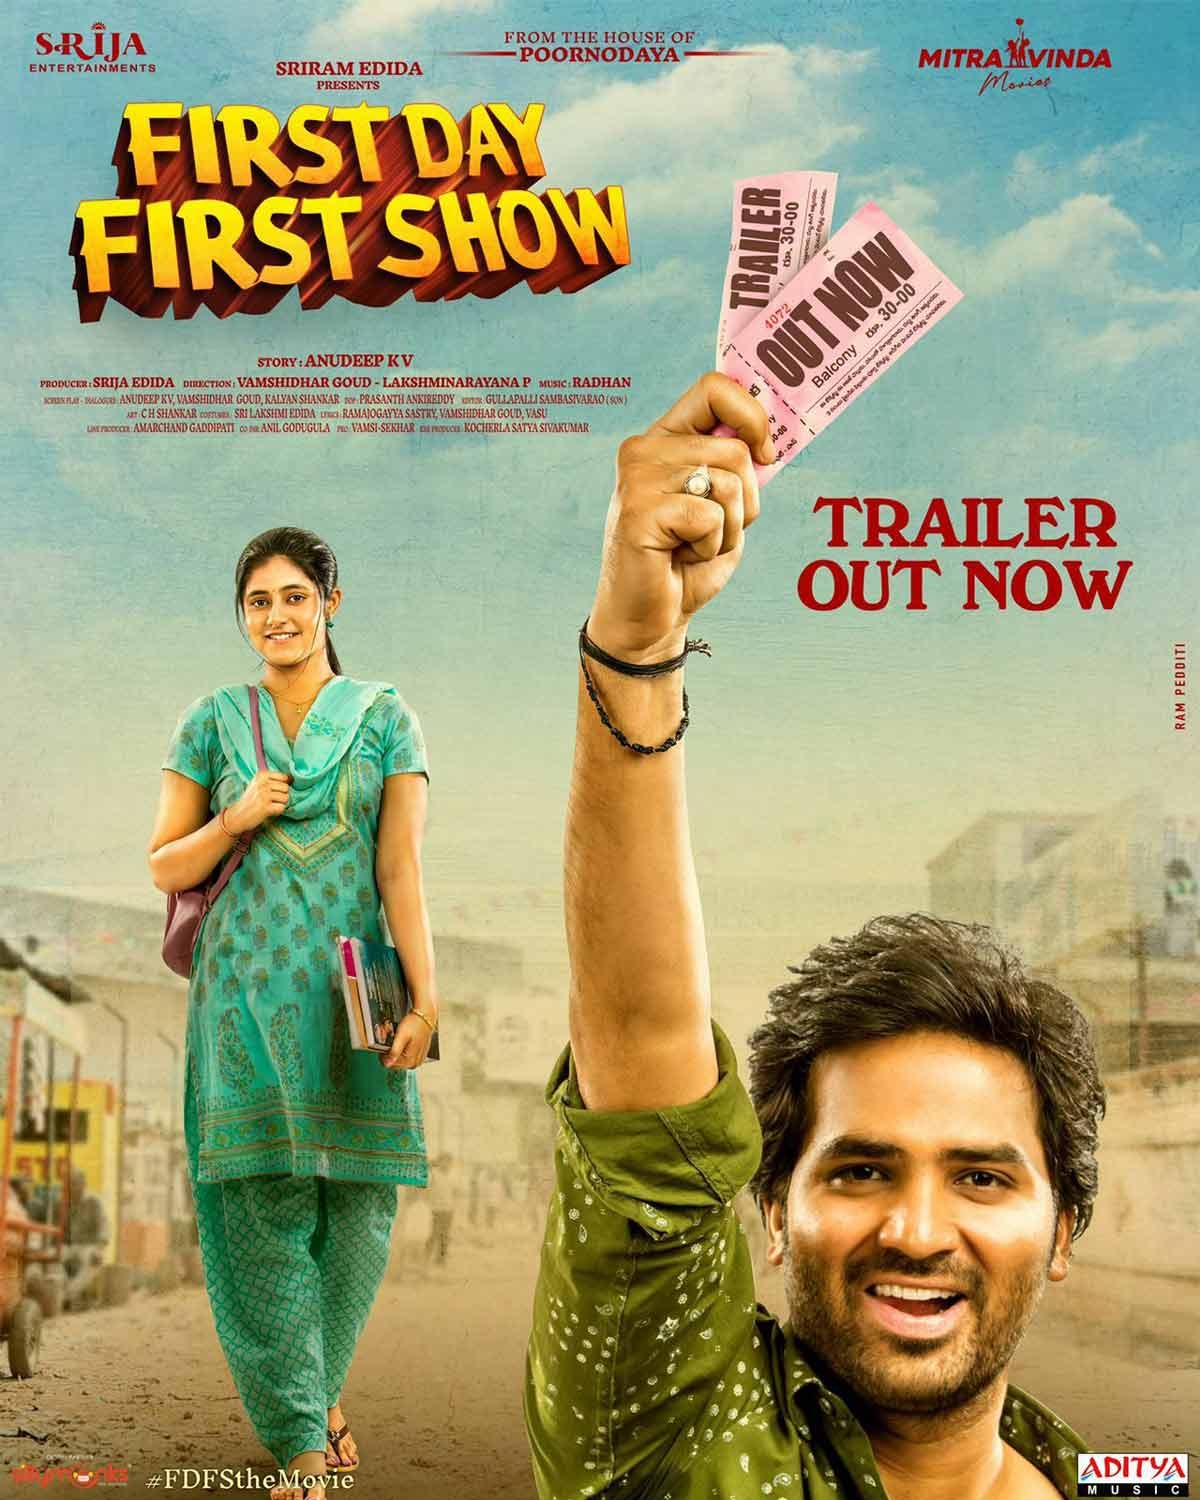 First Day First Show Trailer: Filled with fun and banter!